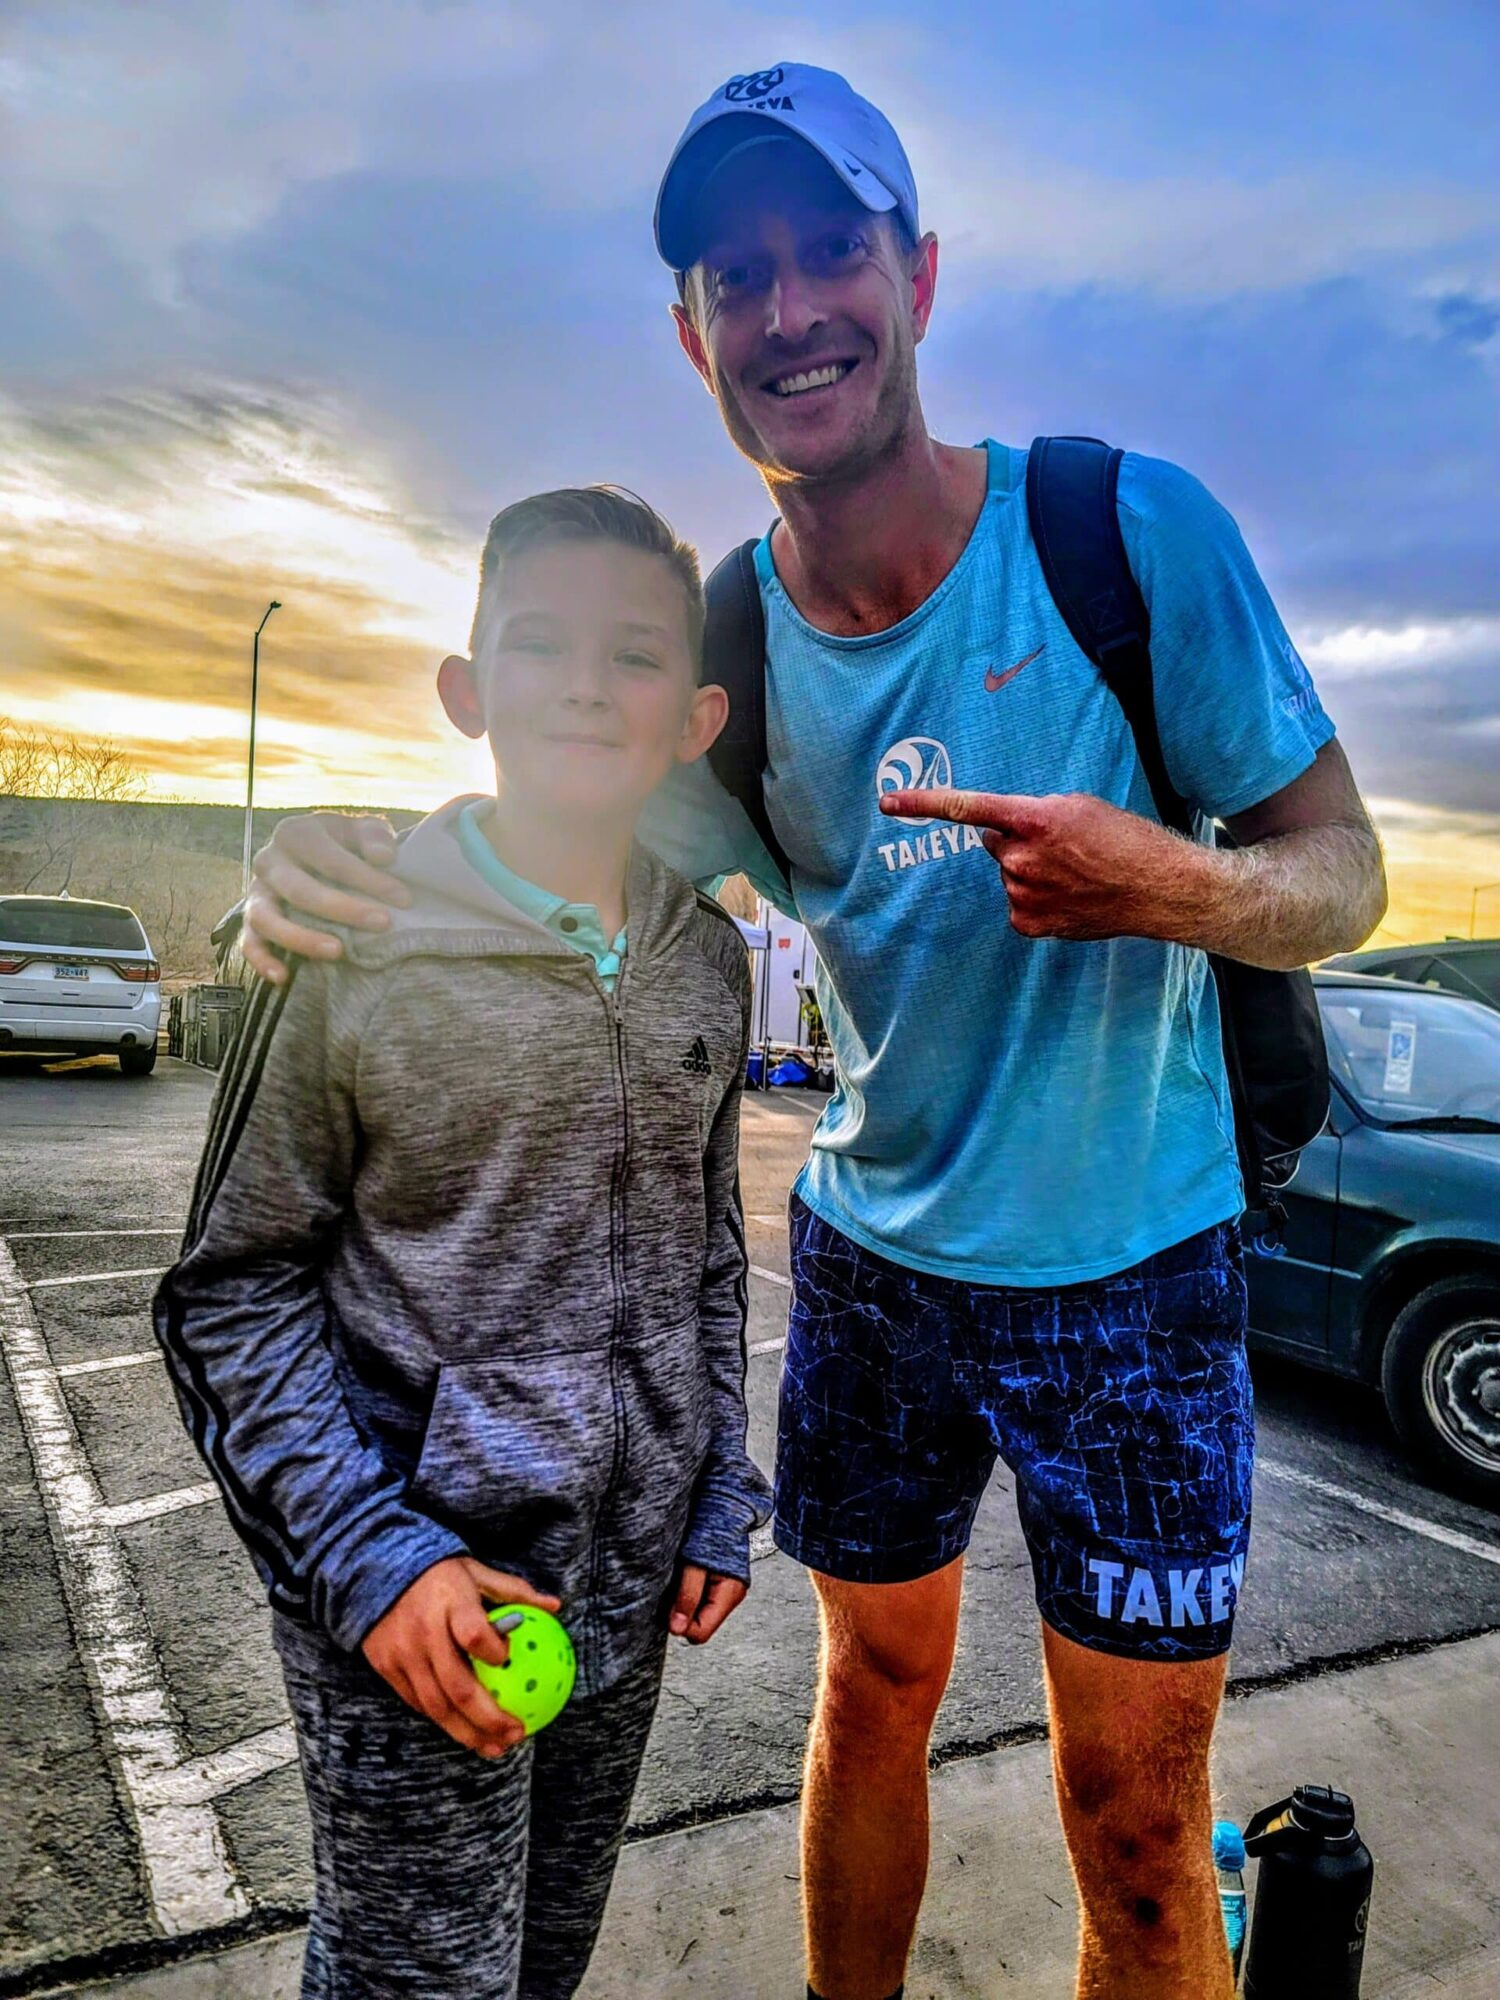 Jett met his hero, Pickleball legend Riley Newman who signed a pickleball and took a pic